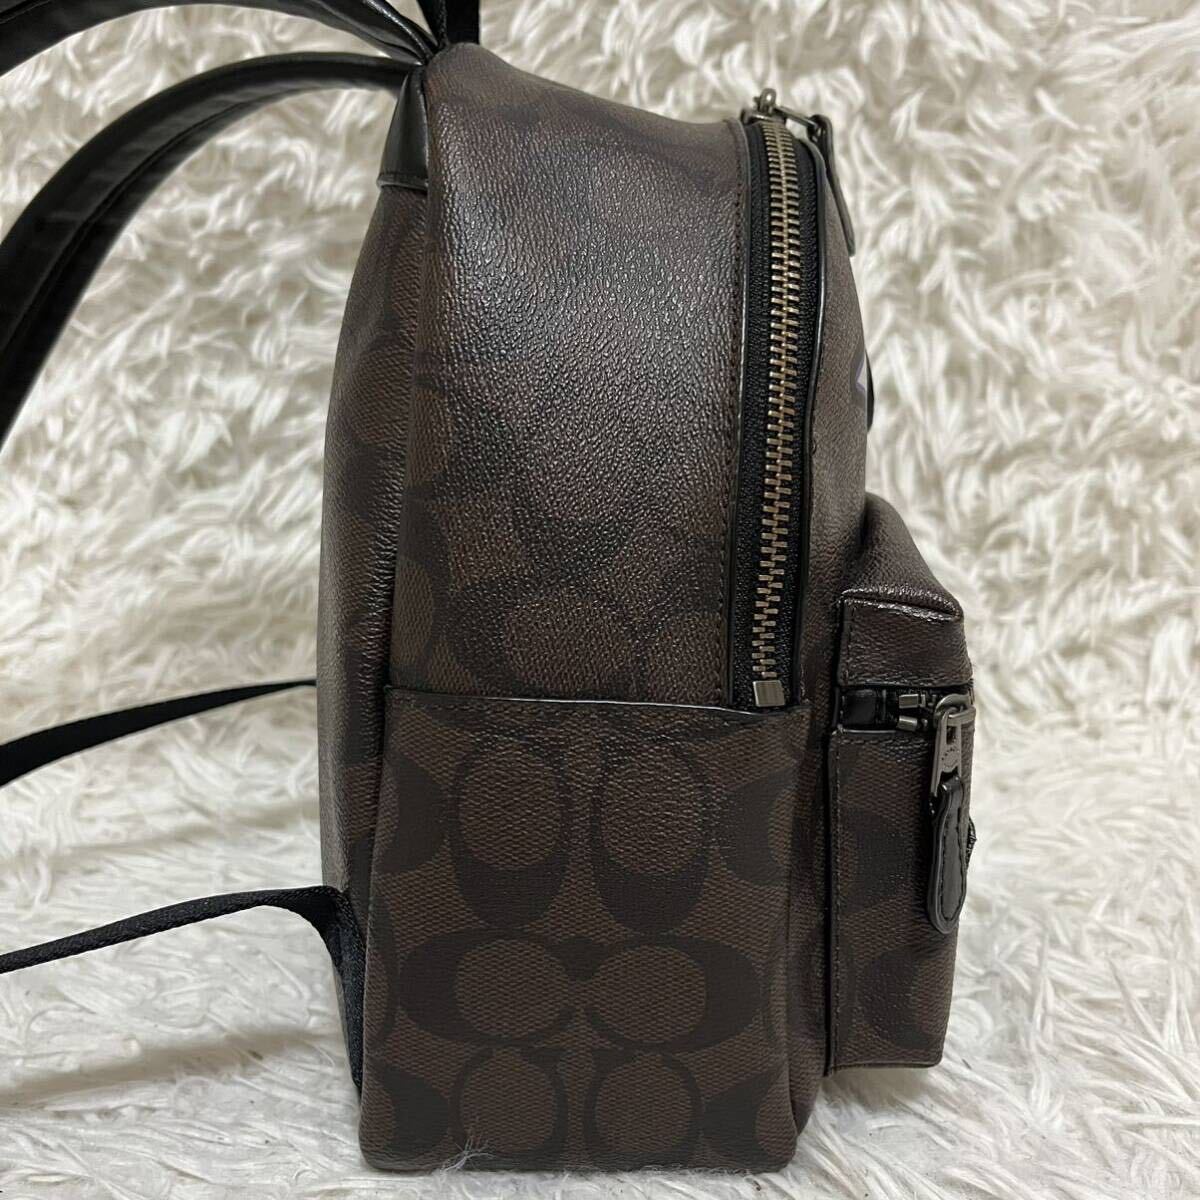  rare ultra rare beautiful goods COACH Coach signature rucksack backpack total pattern badge up like commuting going to school Brown tea color leather 